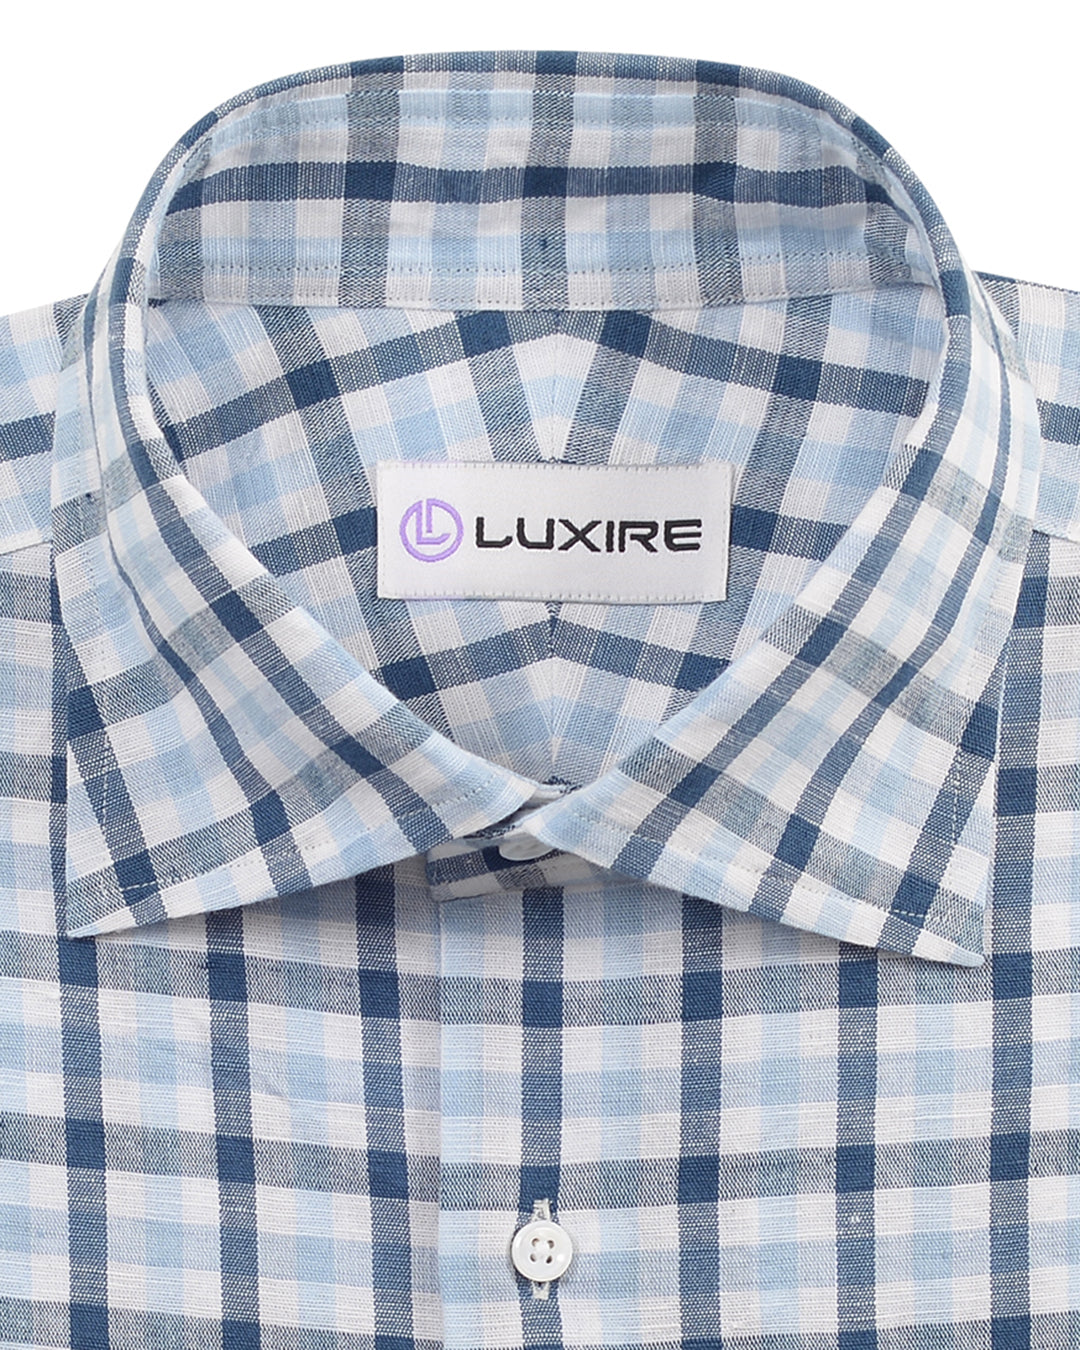 Collar of the custom linen shirt for men in shades of blue checks by Luxire Clothing